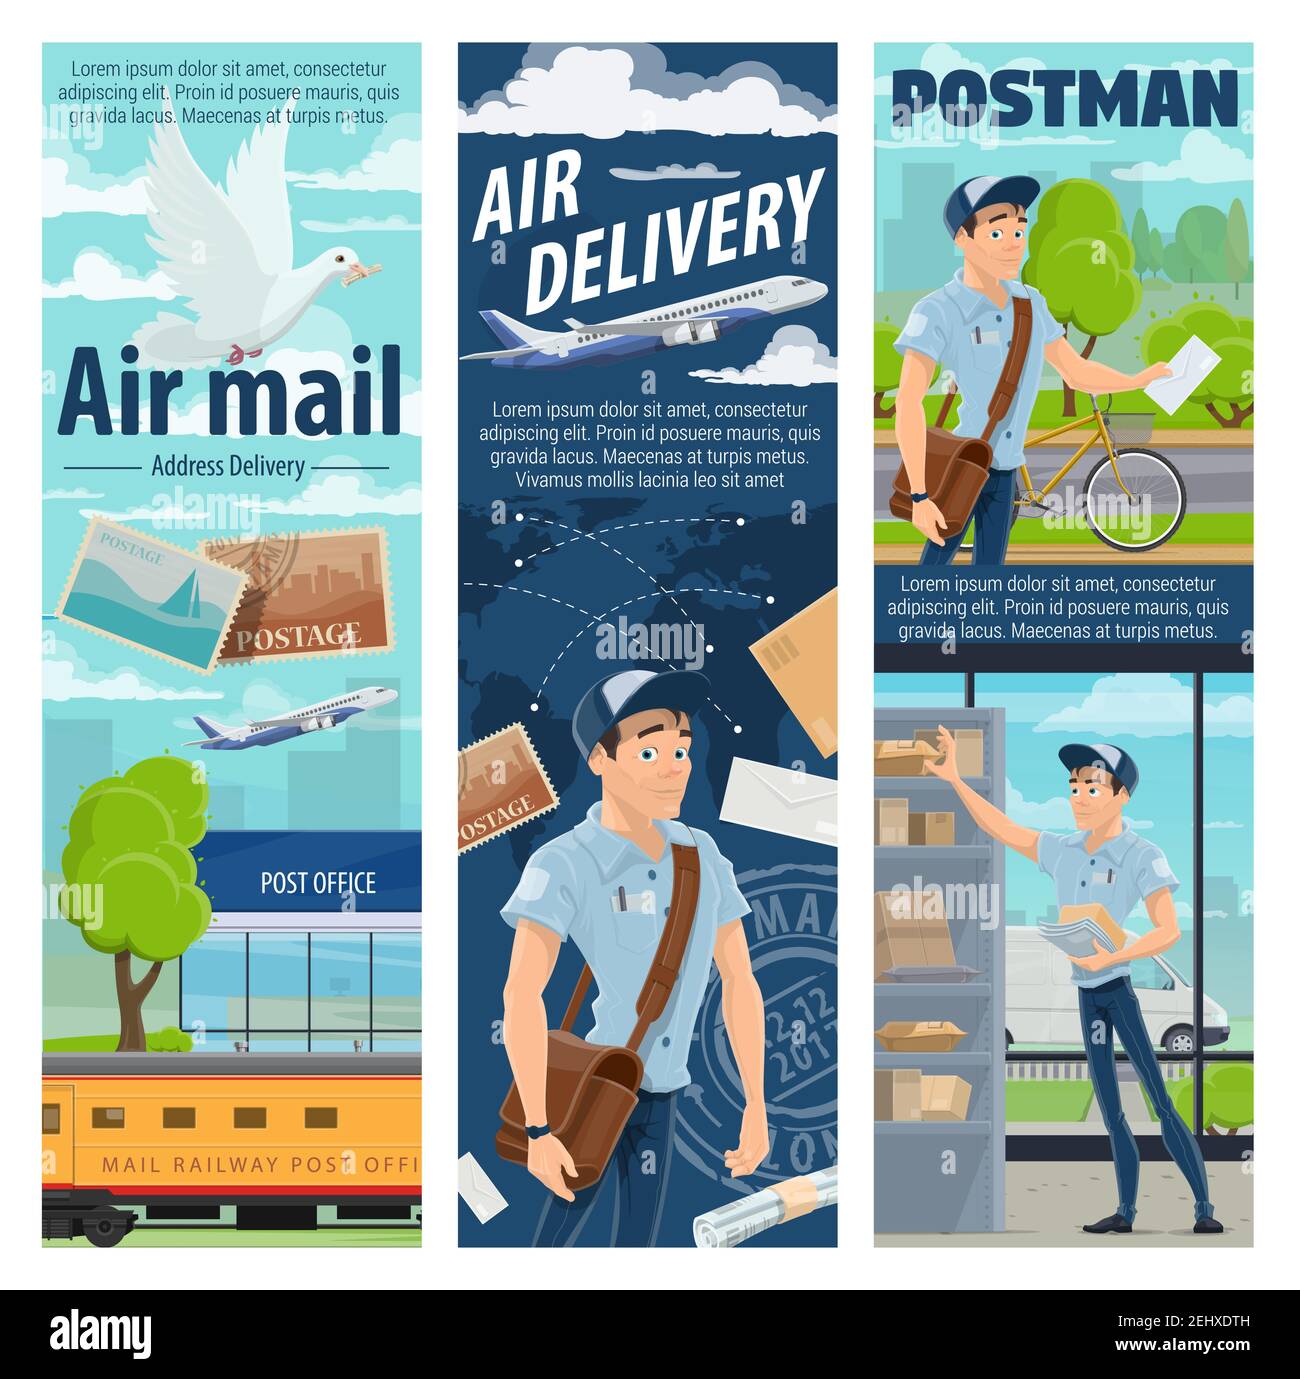 Air mail delivery and mailman profession, postage logistics. Vector cargo airplane and train freight shipping parcel boxes with newspaper, magazines a Stock Vector